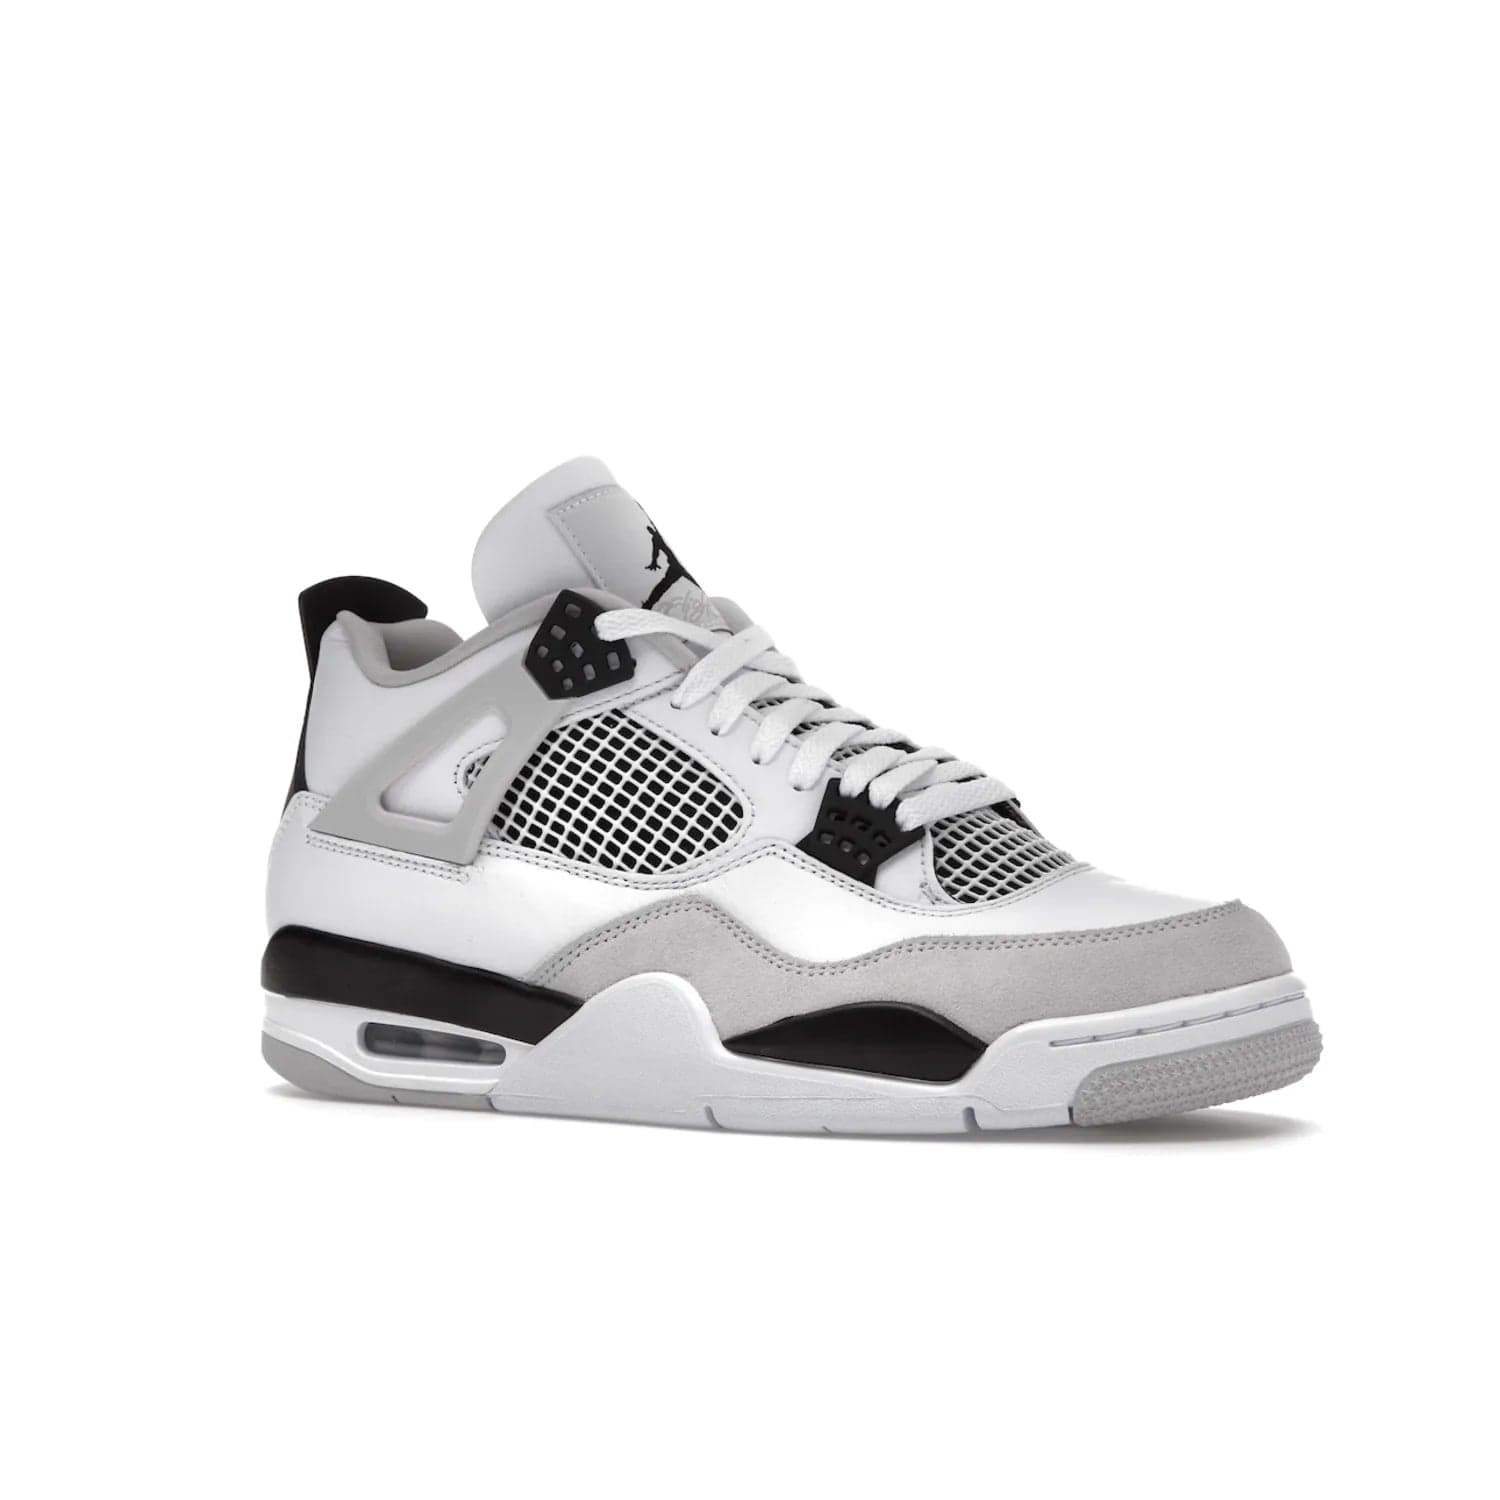 Jordan 4 Retro Military Black - Image 4 - Only at www.BallersClubKickz.com - Updated Air Jordan 4 style with a white/black/light grey sole and visible Air unit. Released in May 2022, offering timeless classic style and comfort.